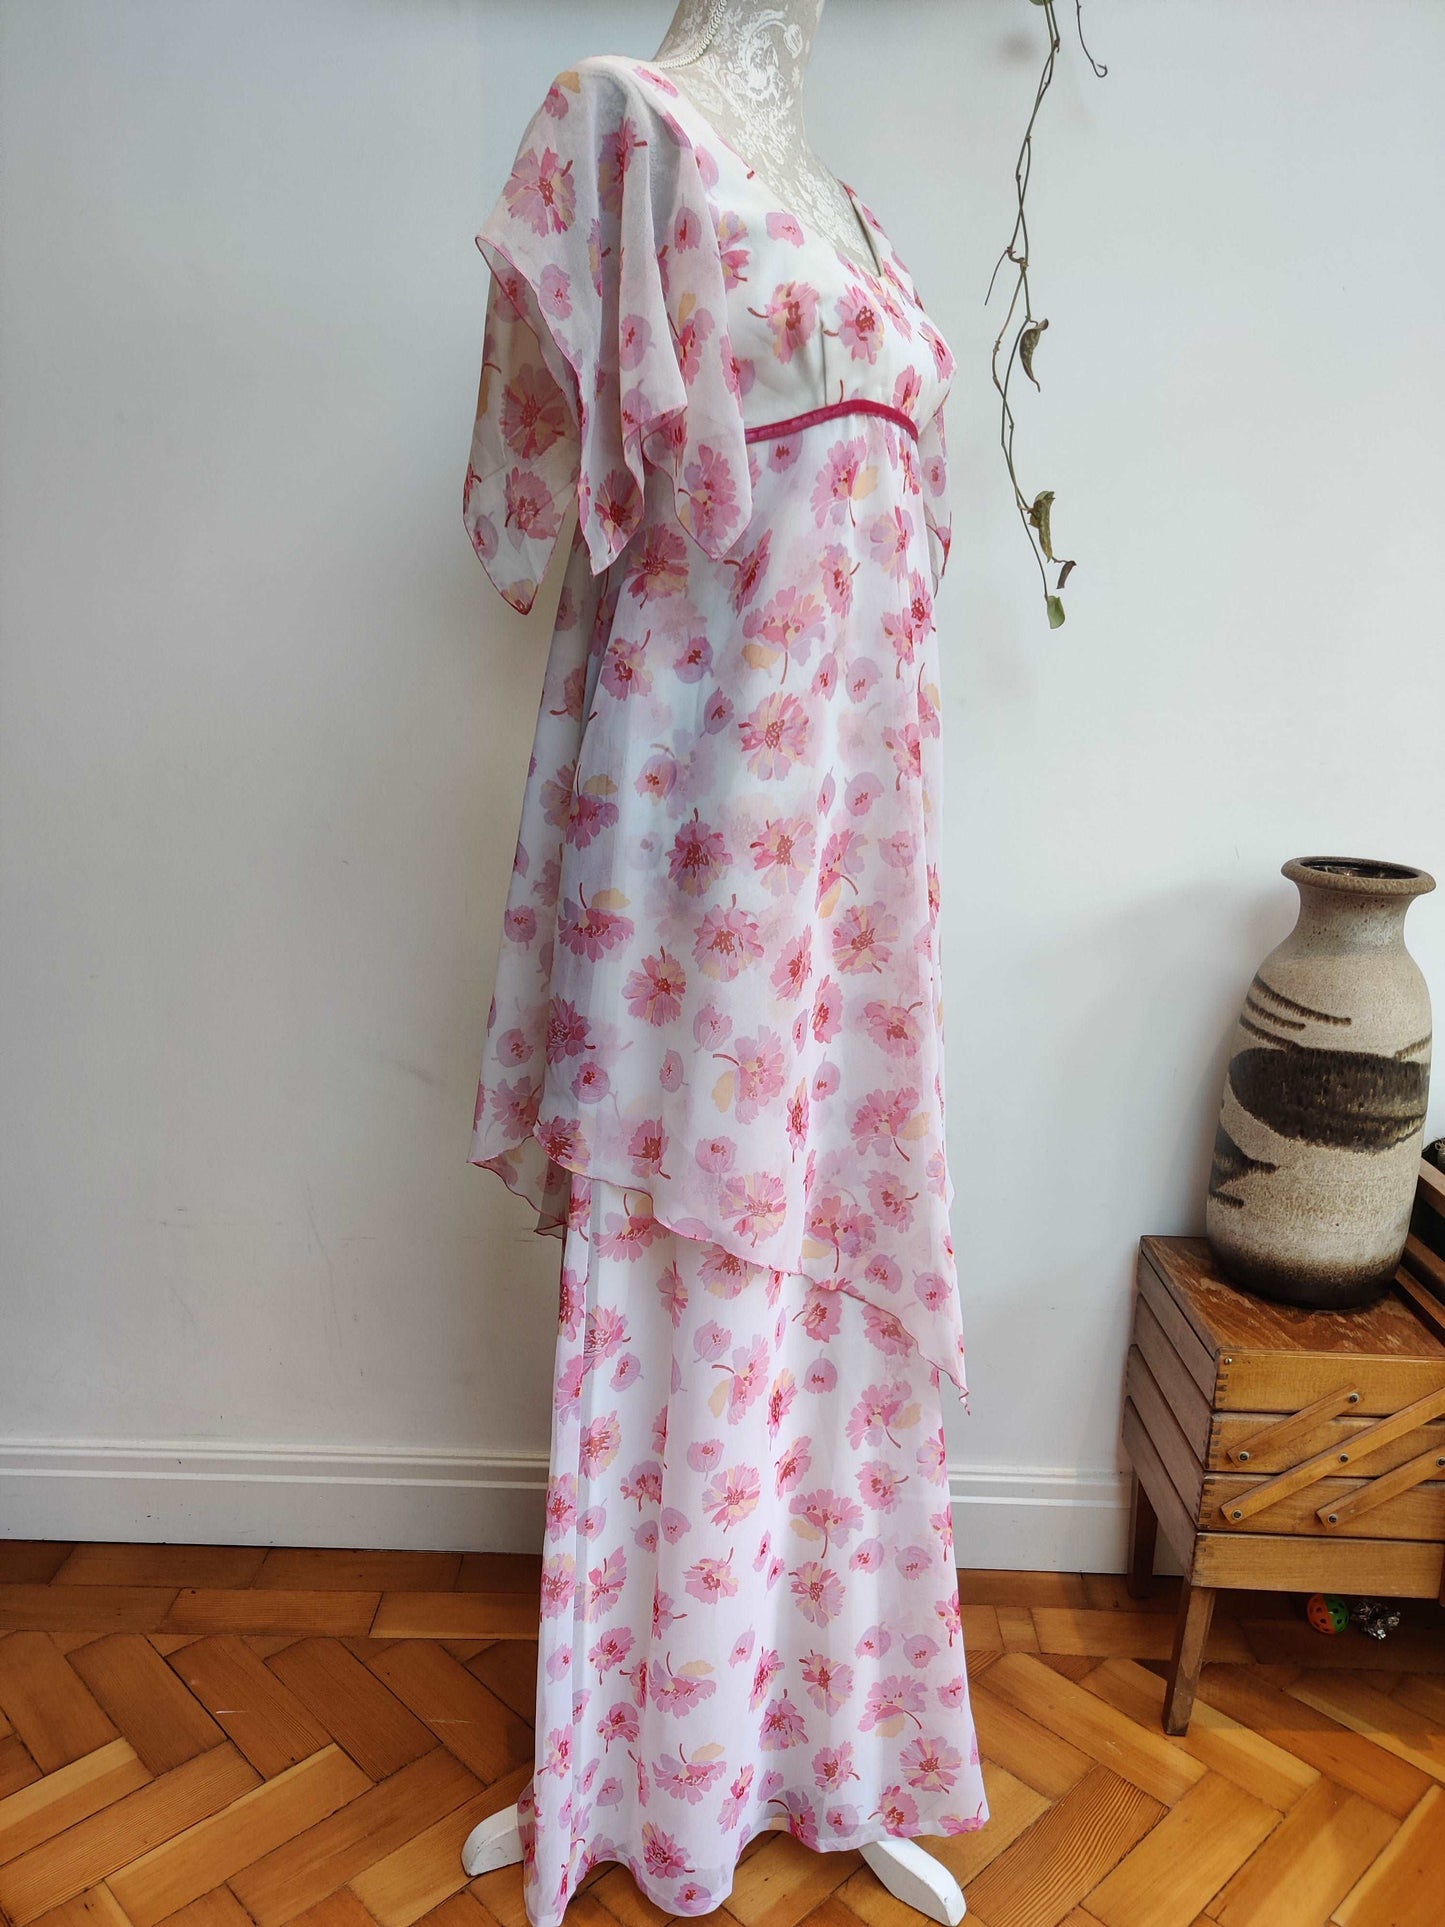 70s tiered angel dress. Pink and white floral.